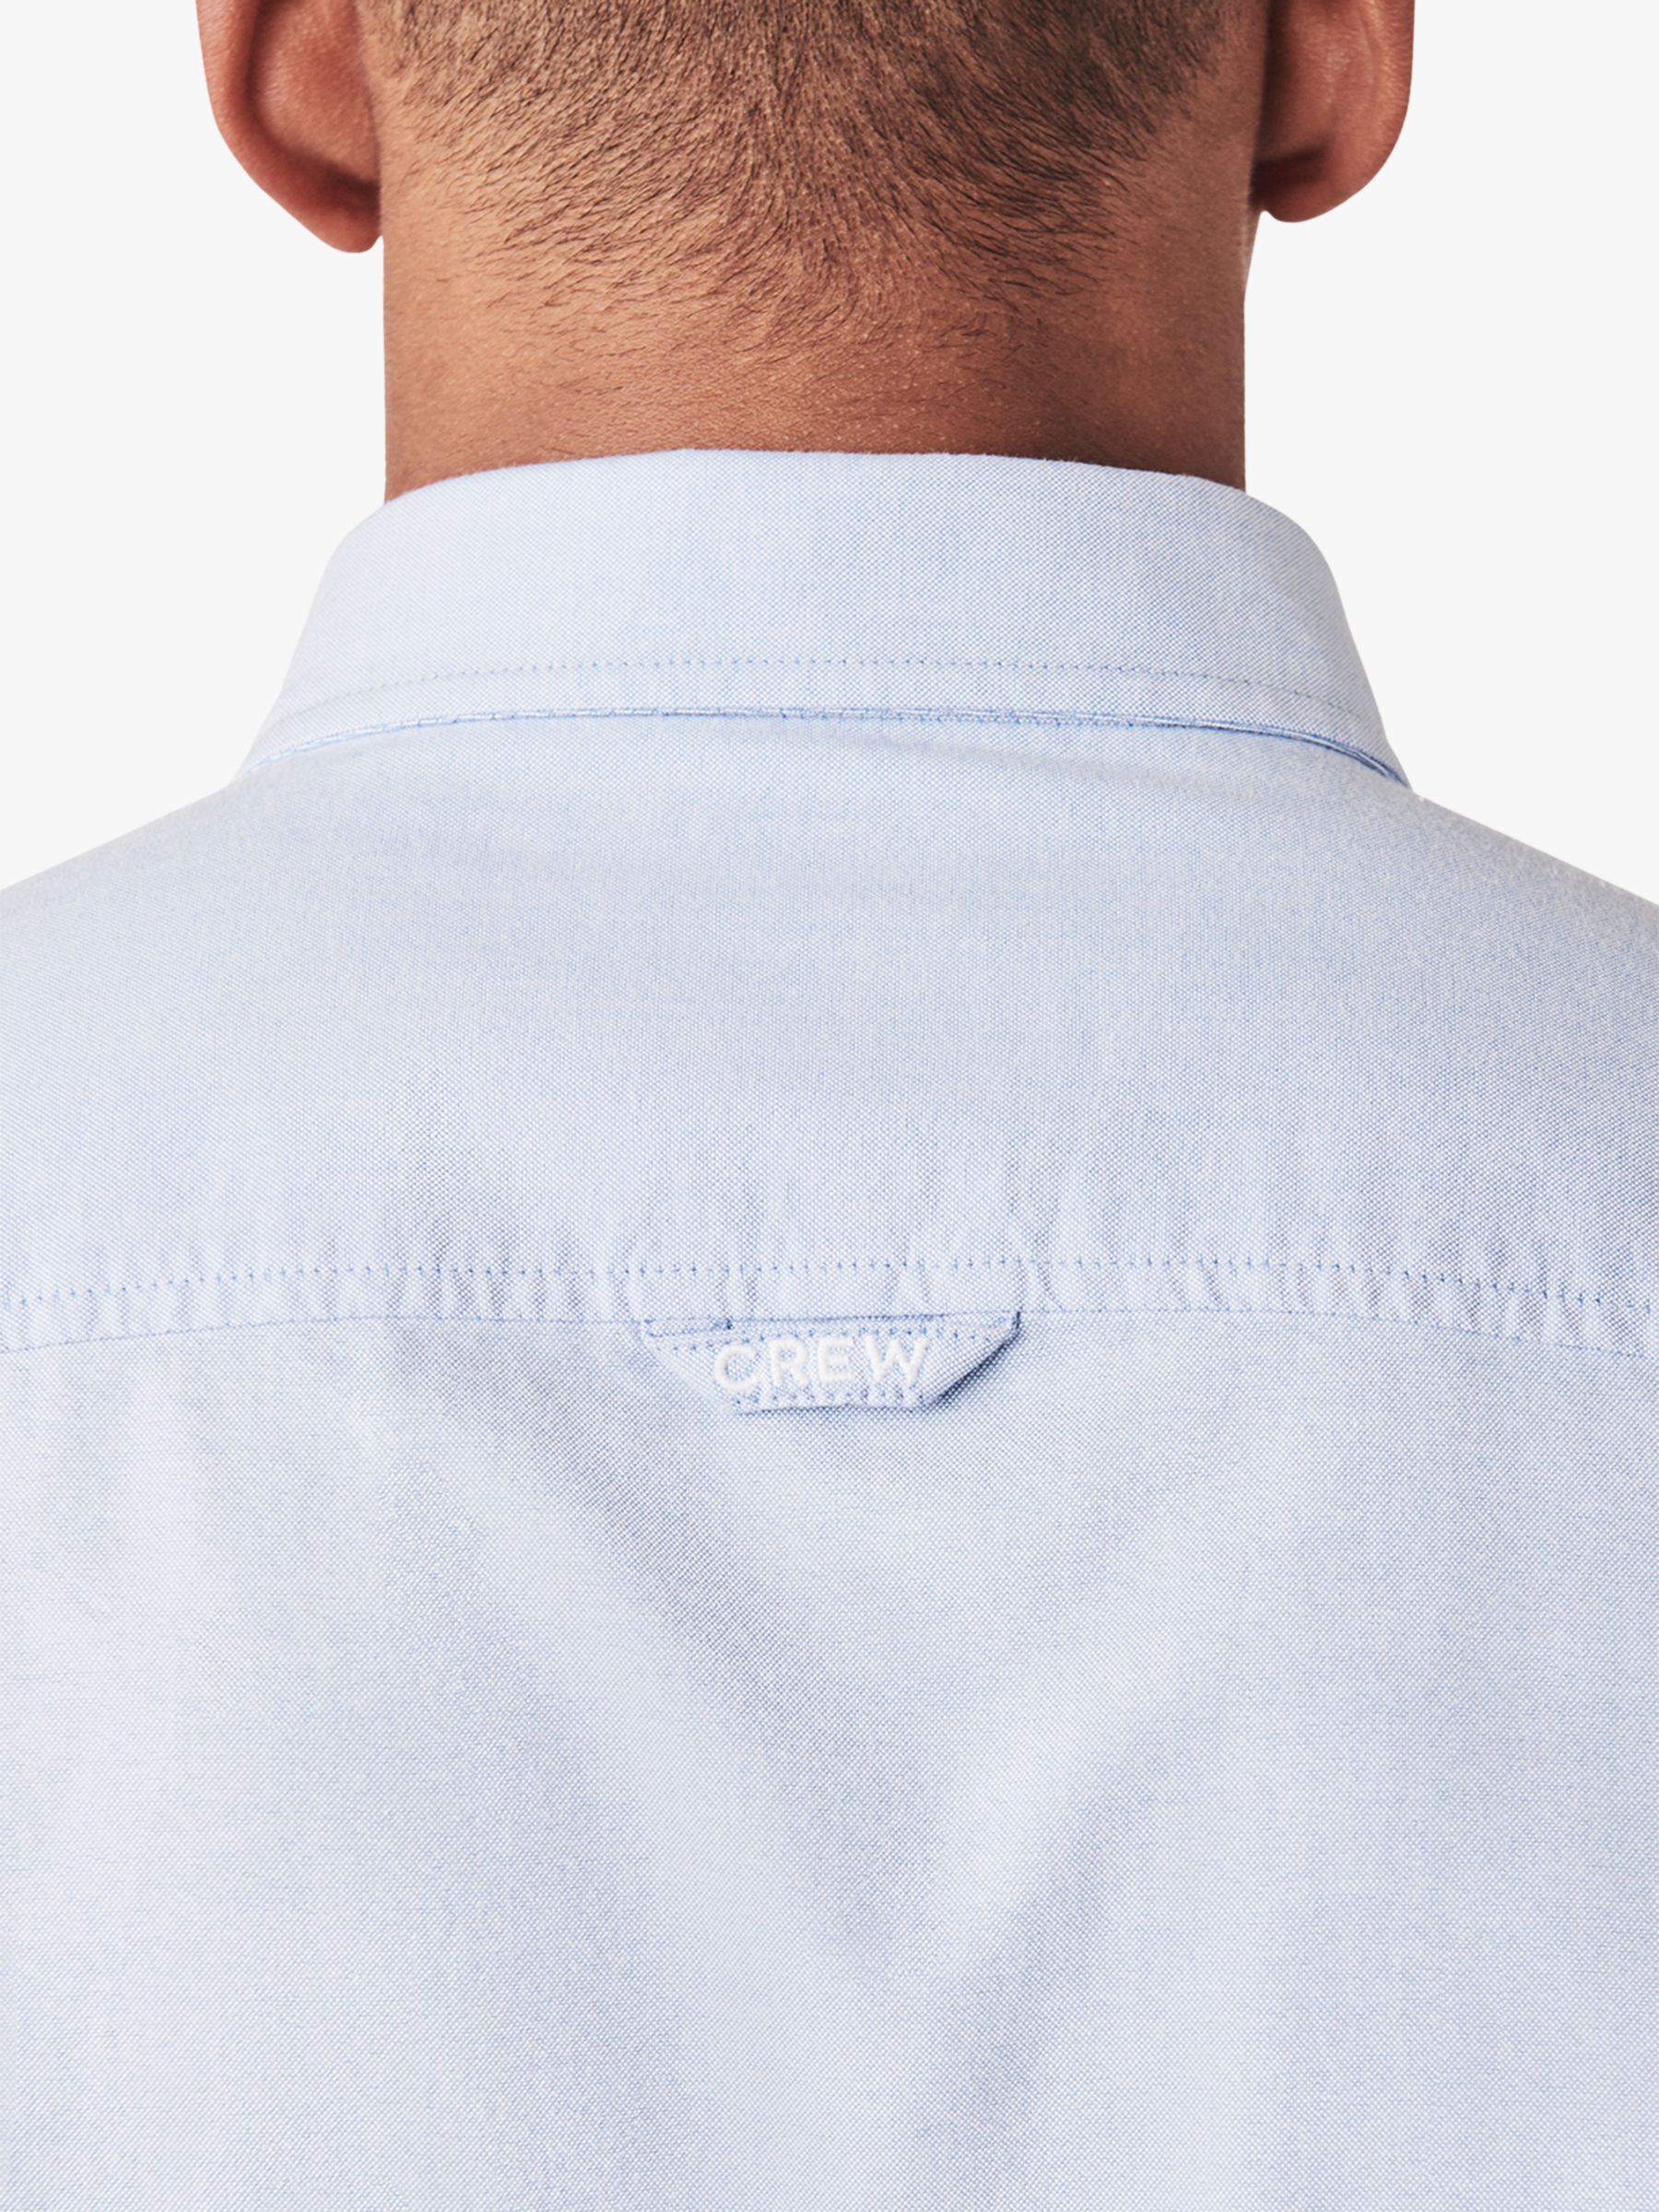 Buy Crew Clothing Slim Fit Long Sleeve Oxford Shirt Online at johnlewis.com